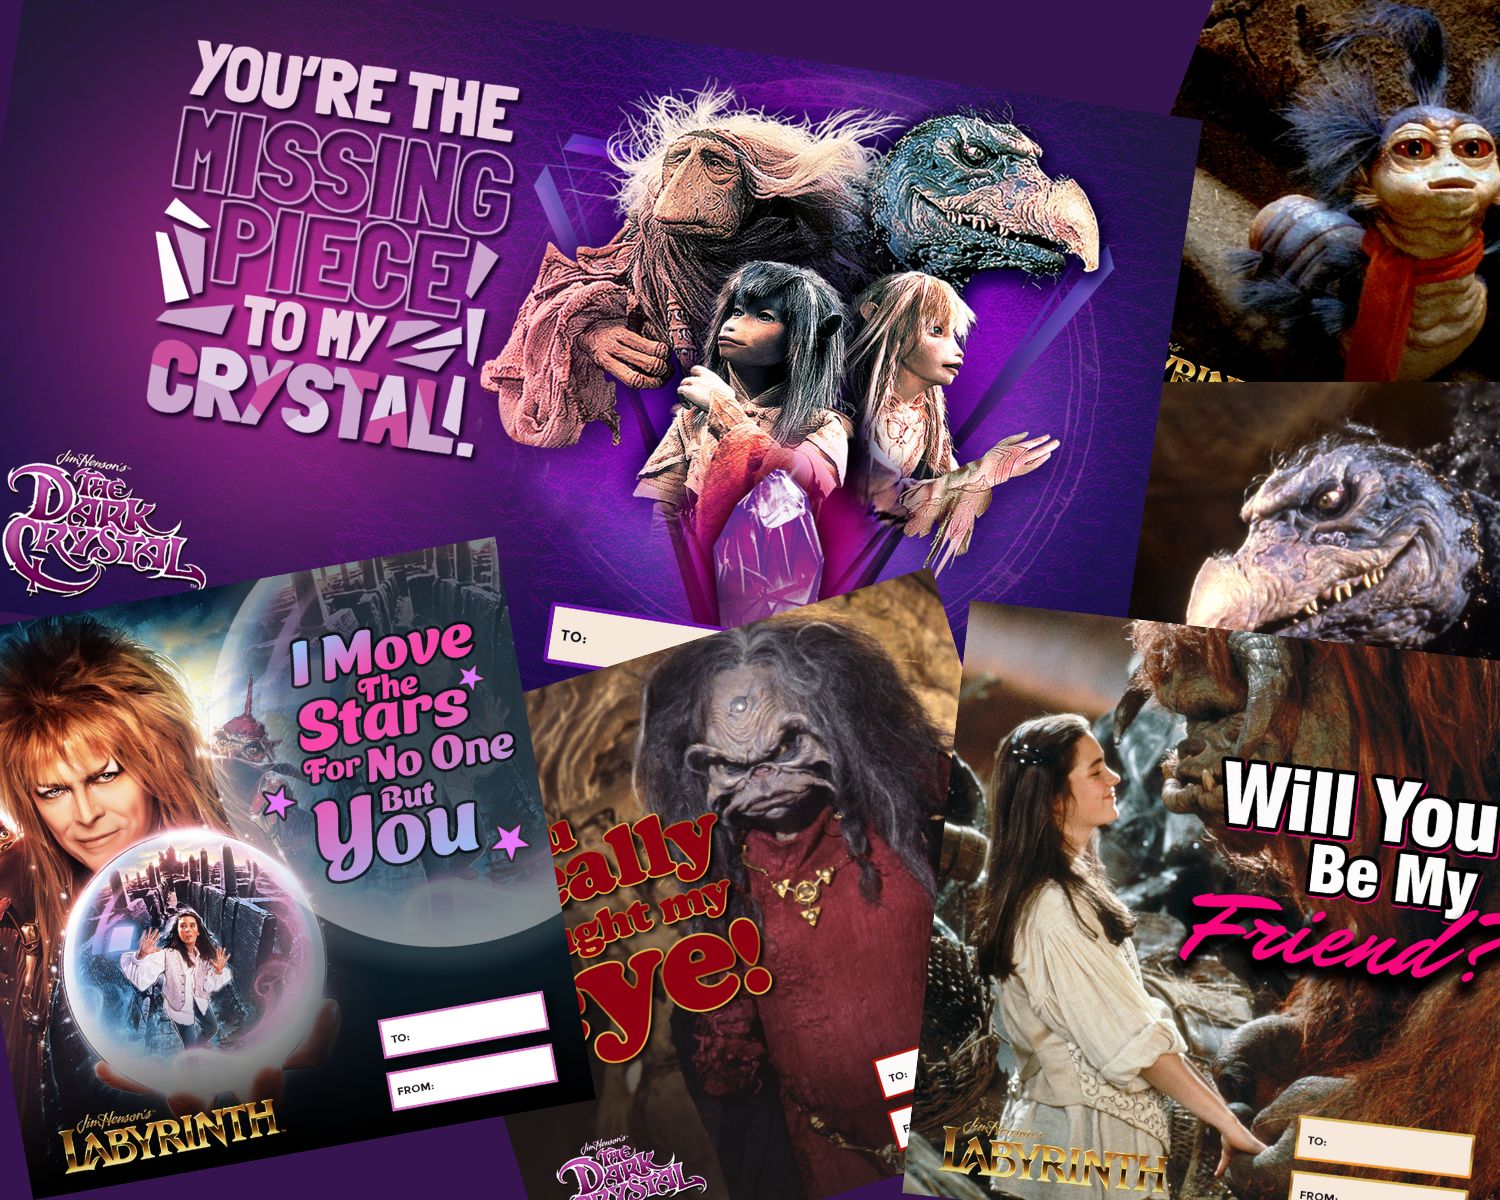 Valentine's Day cards featuring David Bowie in Labyrinth and Jim Henson's The Dark Crystal now streaming in 4K